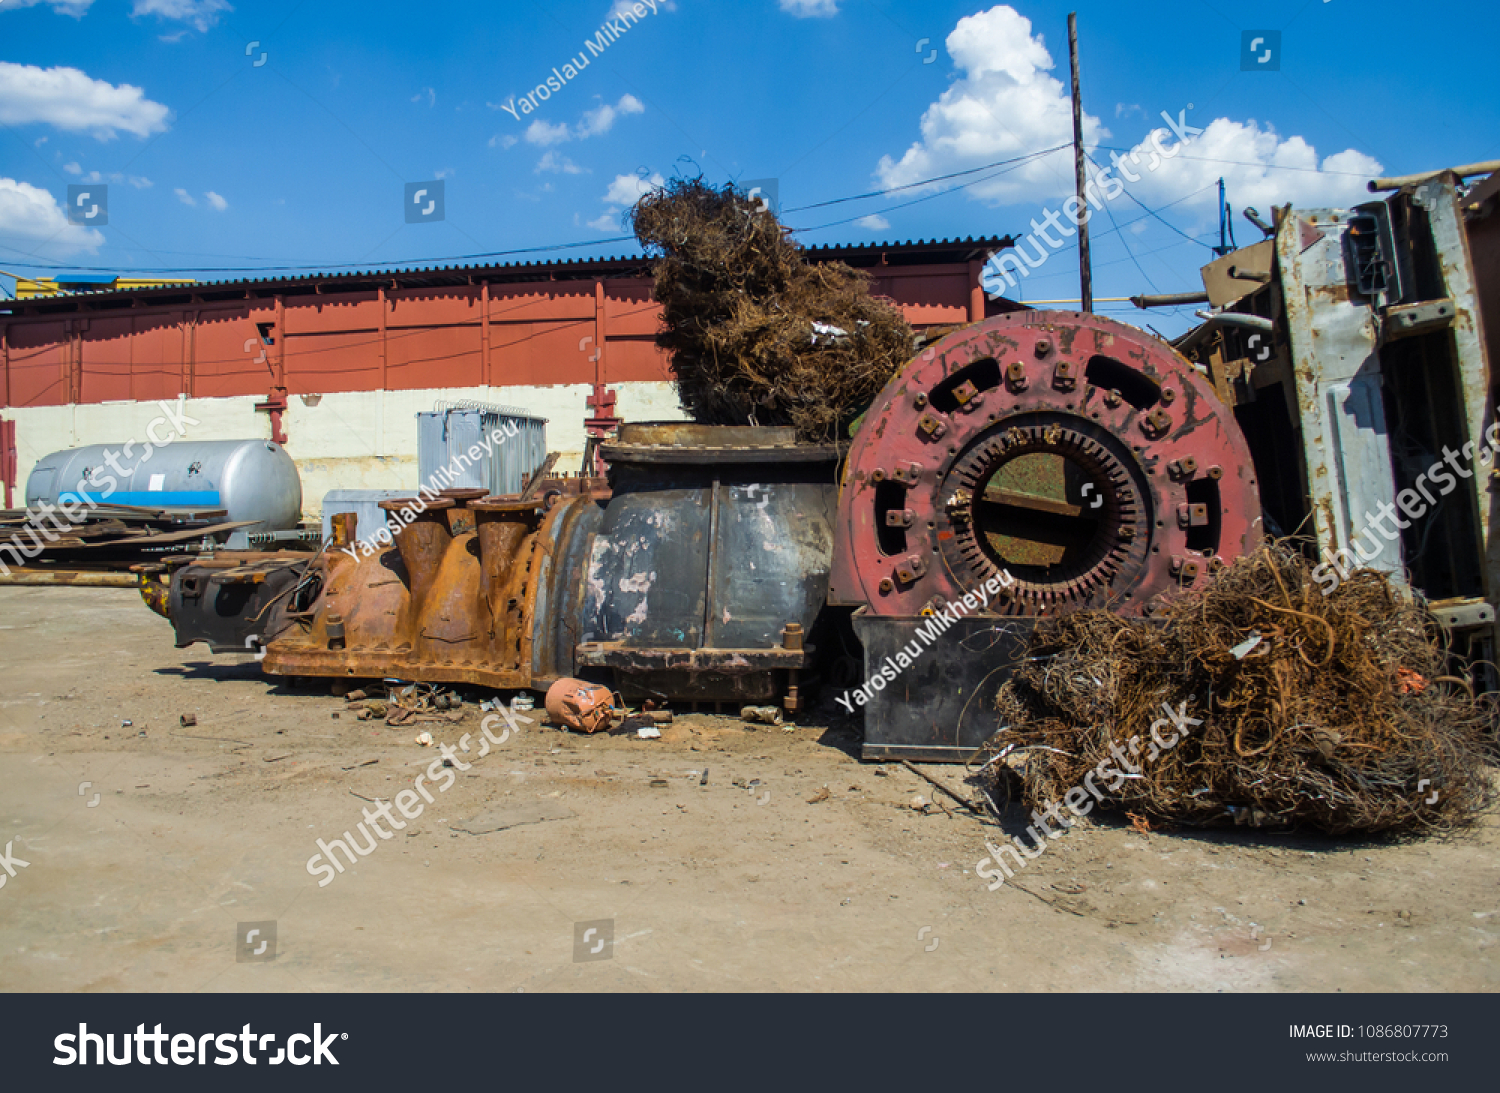 car disassembly used cars piles used stock photo edit now 1086807773 shutterstock